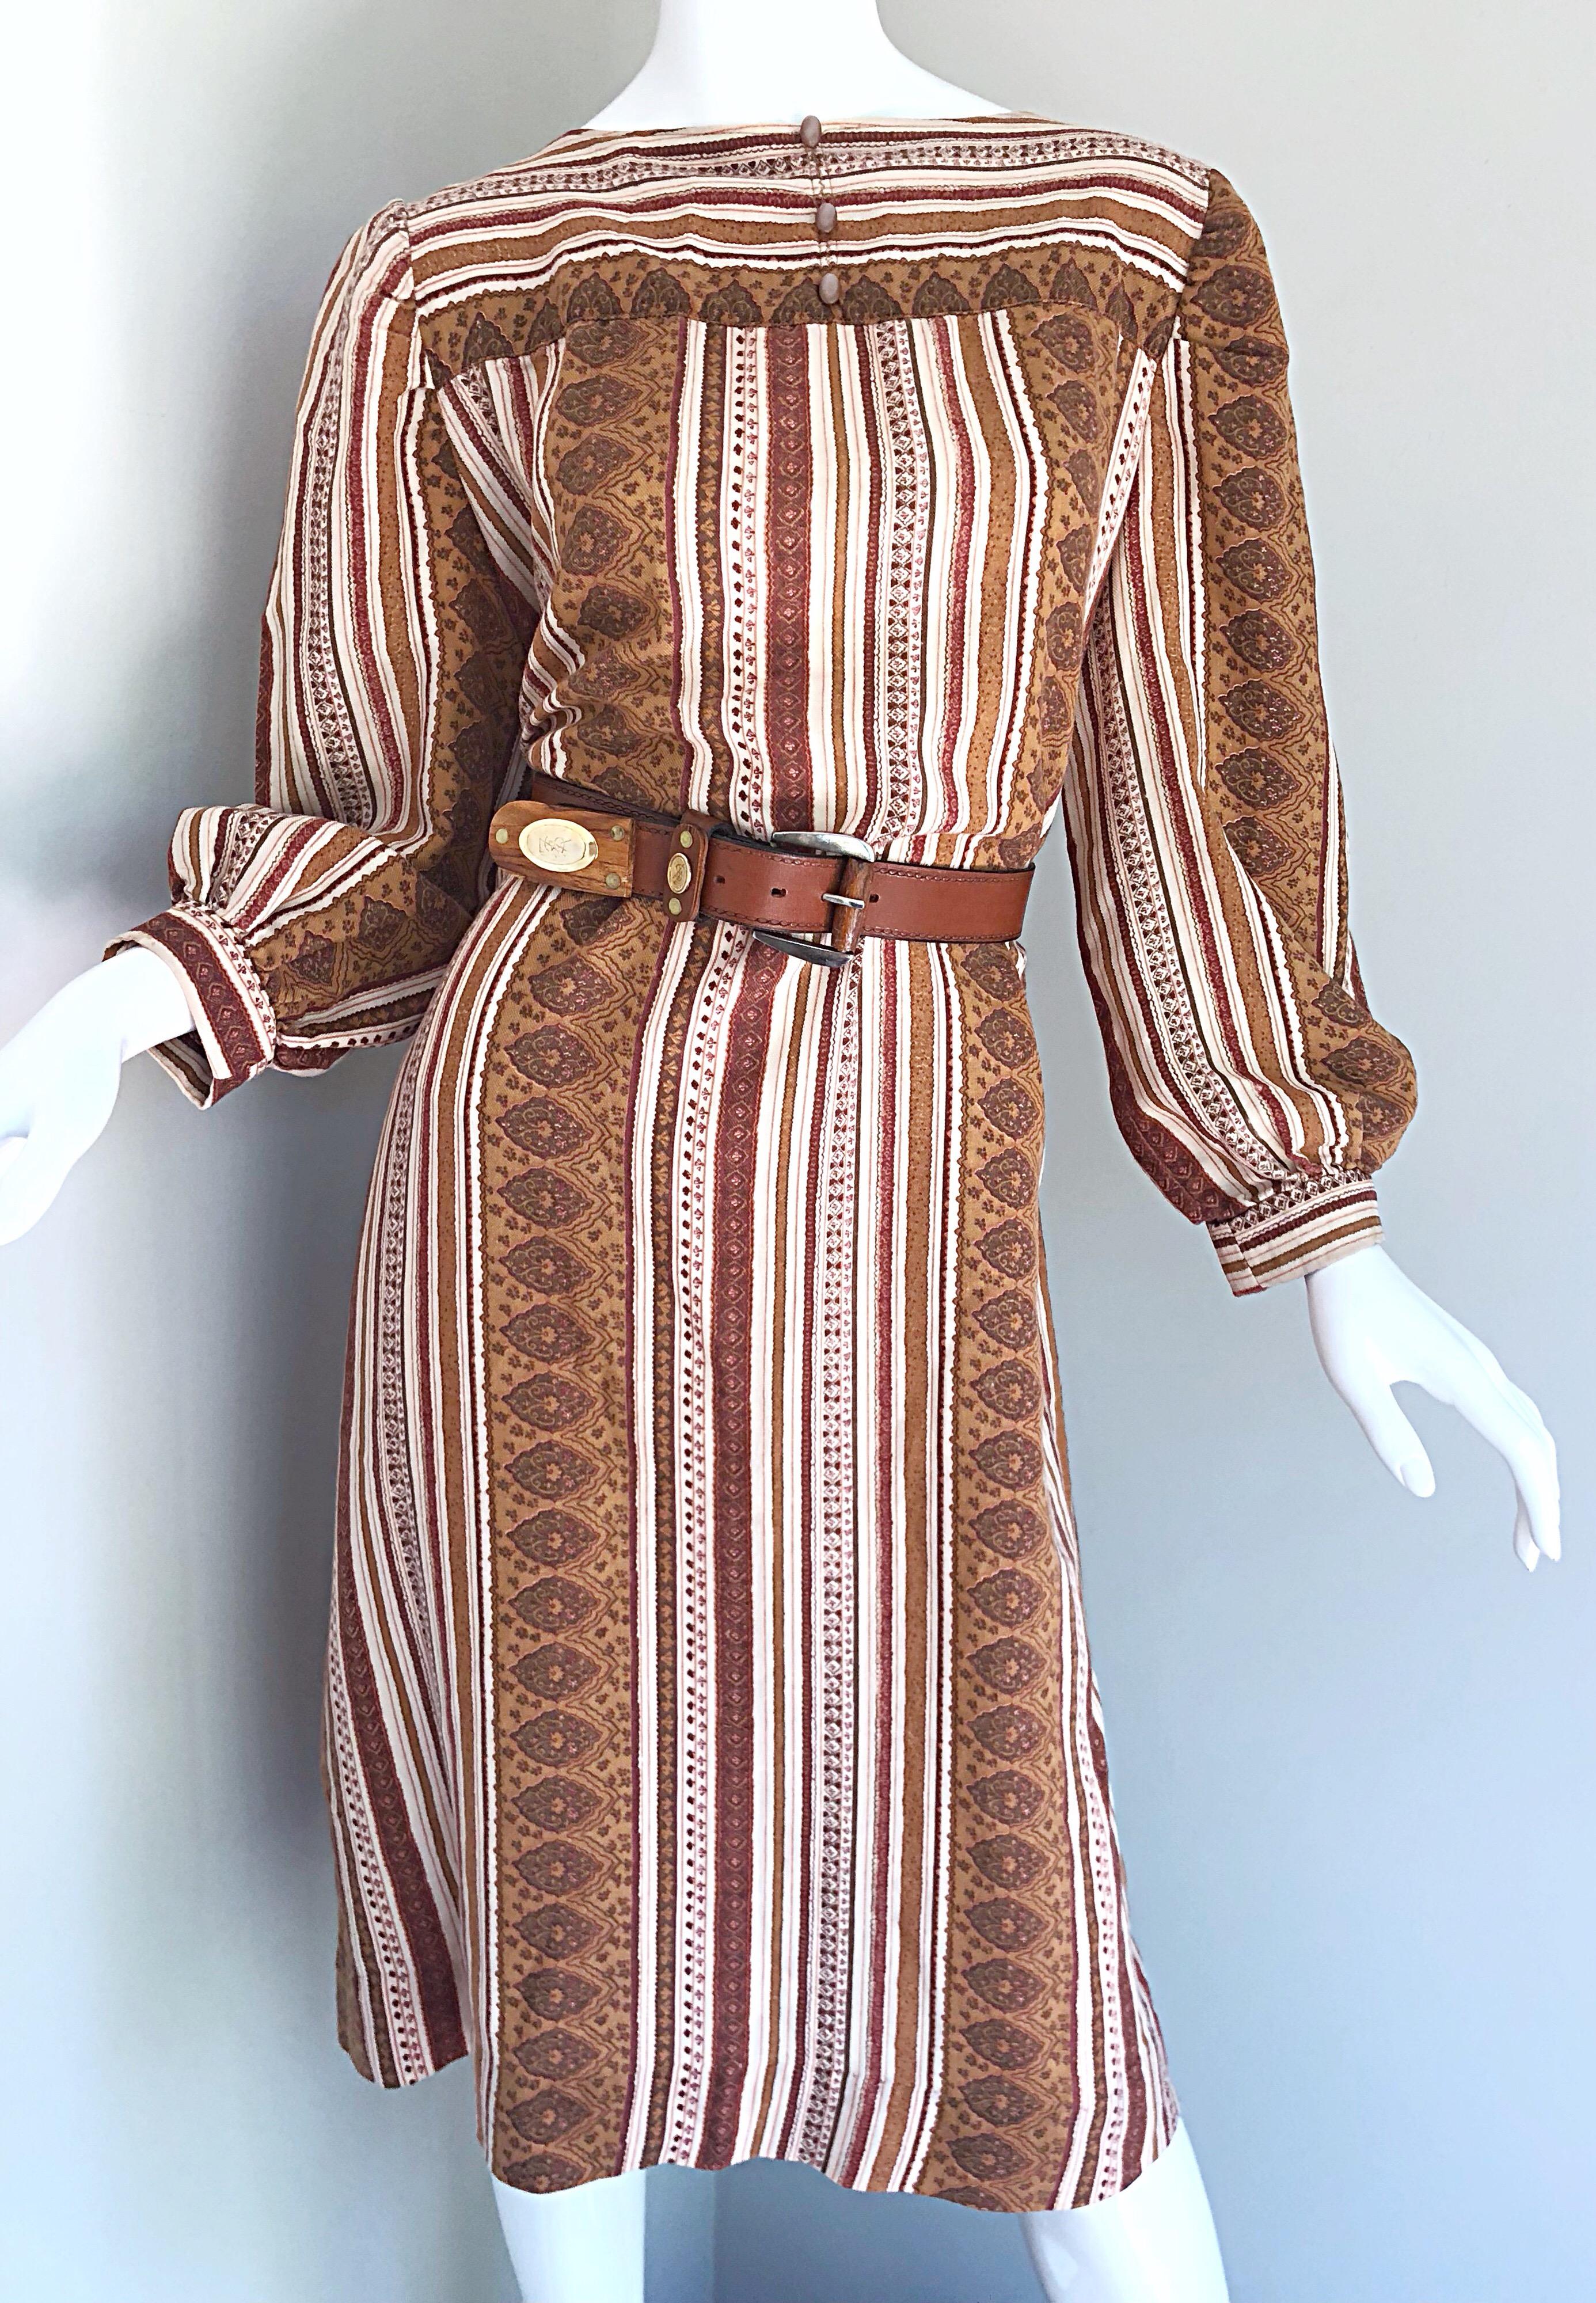 1970s Boho Chic Brown and Ivory Soft Cotton Paisley Print Vintage 70s Dress 1